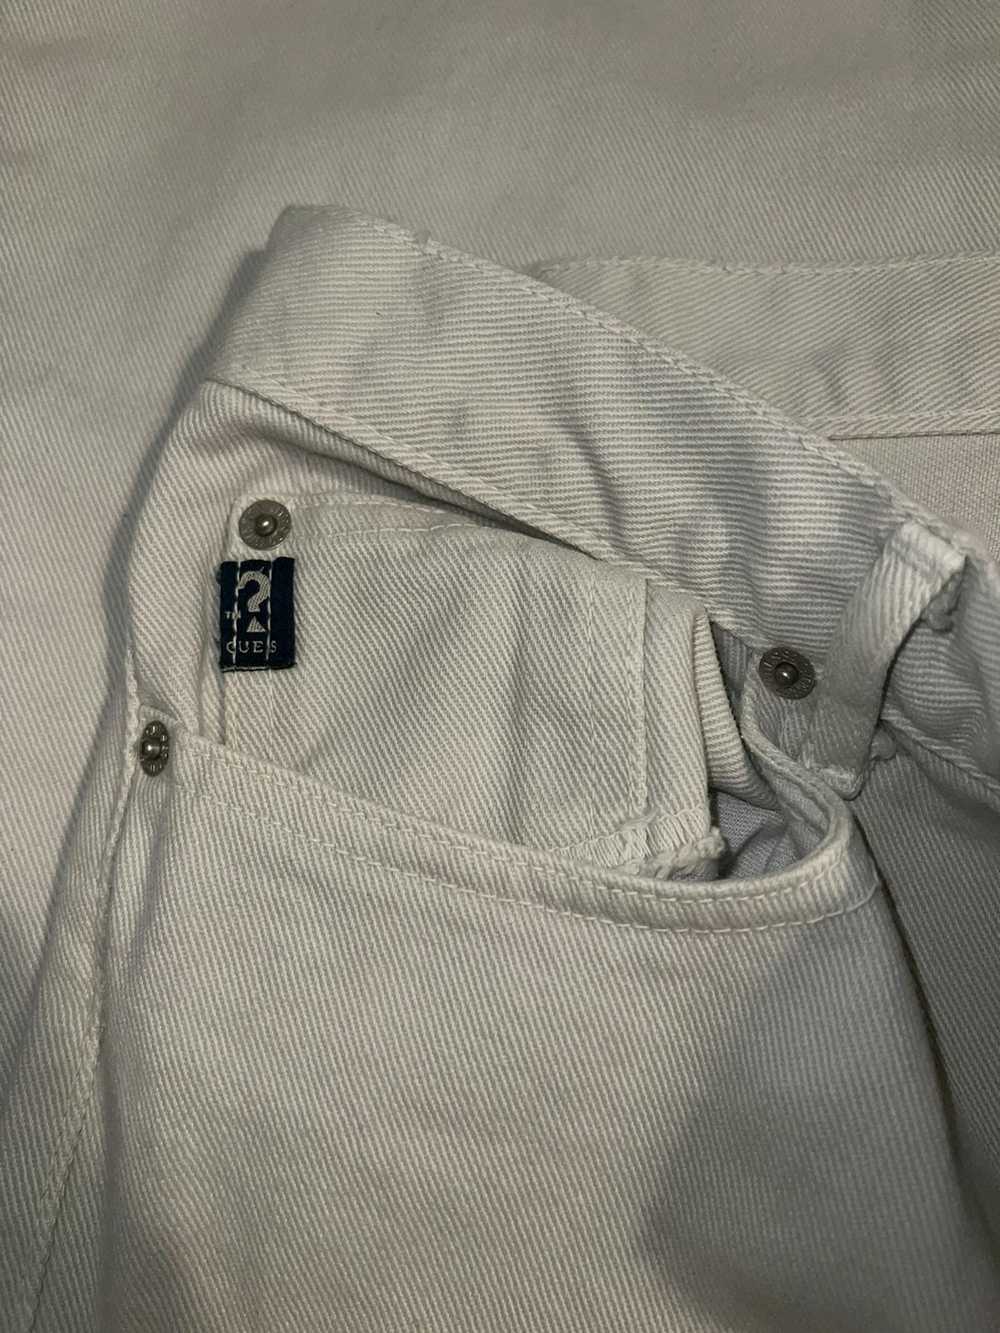 Guess White/cream vintage guess jeans size 36W/30L - image 4